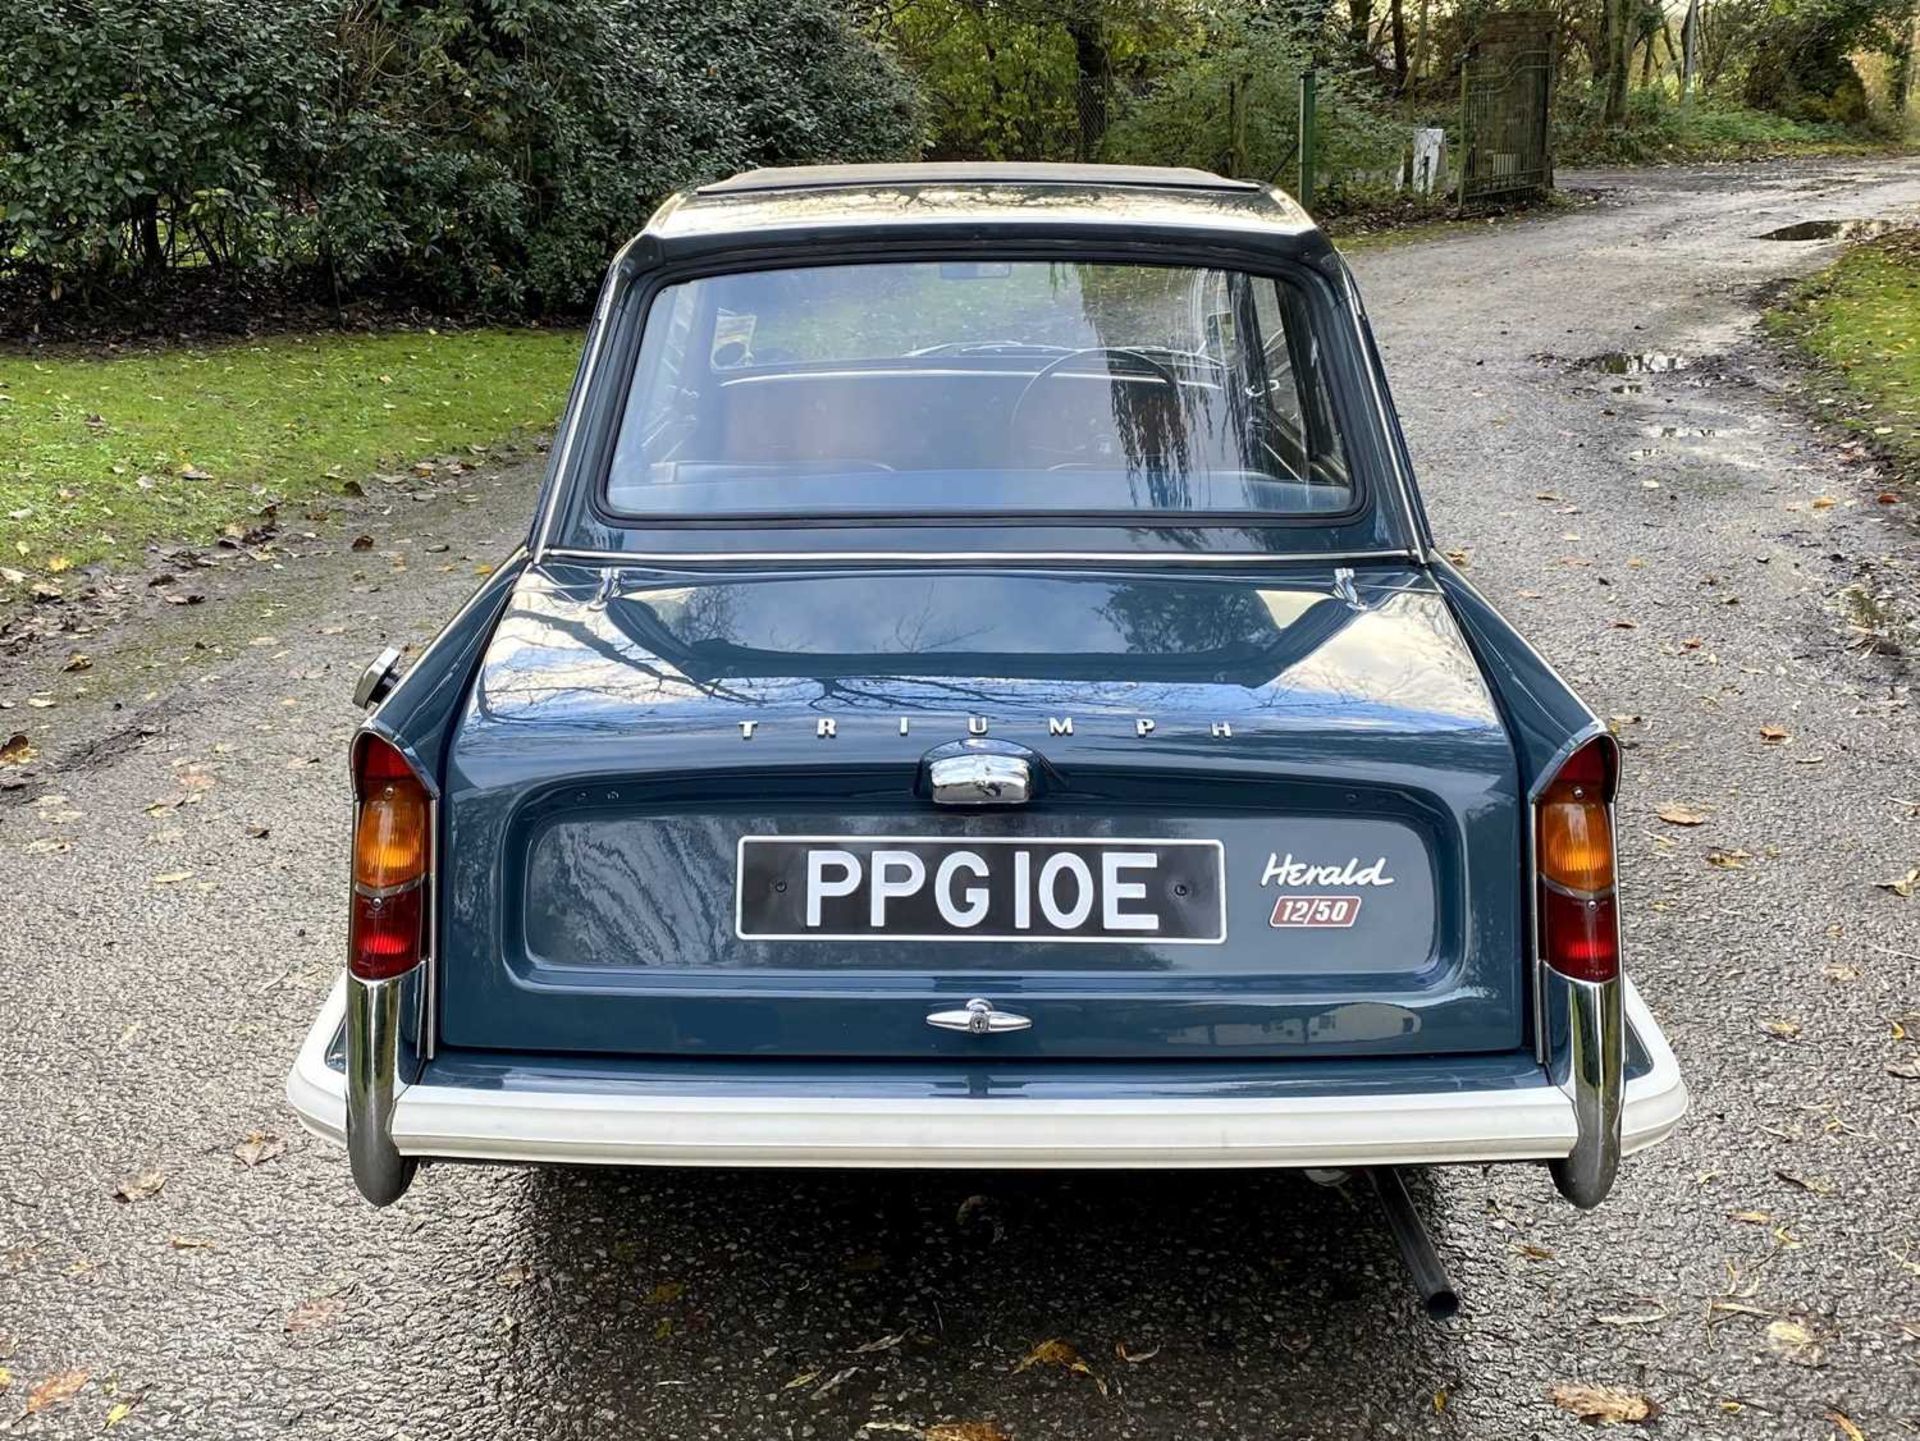 1967 Triumph Herald 12/50 *** NO RESERVE *** Subject to an extensive restoration - Image 18 of 97